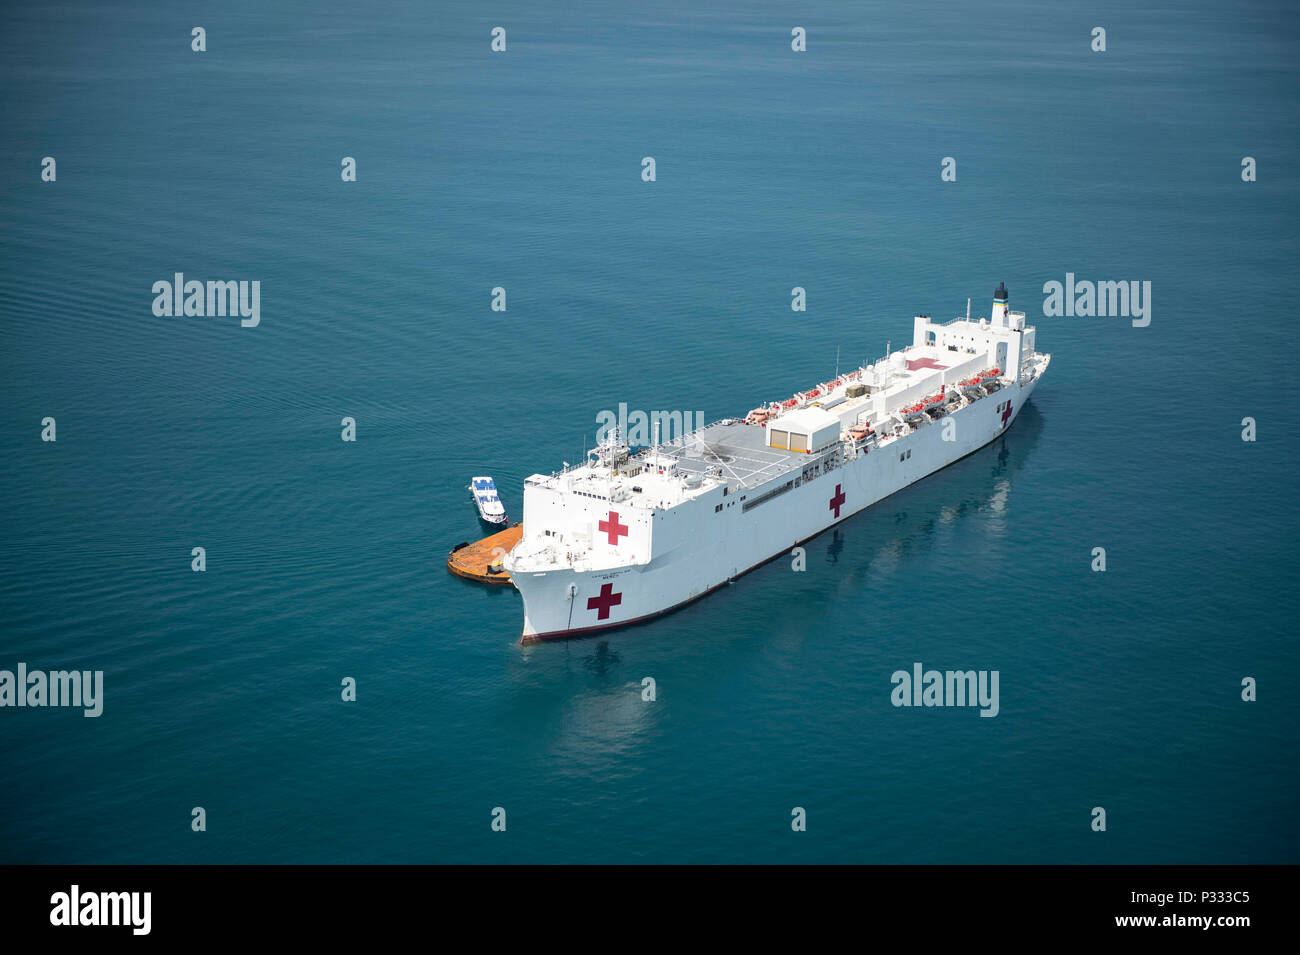 U.S. Navy hospital ship USNS Mercy (T-AH 19) sits anchored off the coast of Padang, during Pacific Partnership 2016's fifth and final mission stop in Padang, Indonesia, Aug. 29, 2016. Pacific Partnership is an annual deployment of forces designed to strengthen maritime and humanitarian partnerships during disaster relief operations, while providing humanitarian, medical, dental and engineering assistance to nations of the Pacific. (U.S. Navy photo by Mass Communication Specialist 3rd Class Trevor Kohlrus) Stock Photo